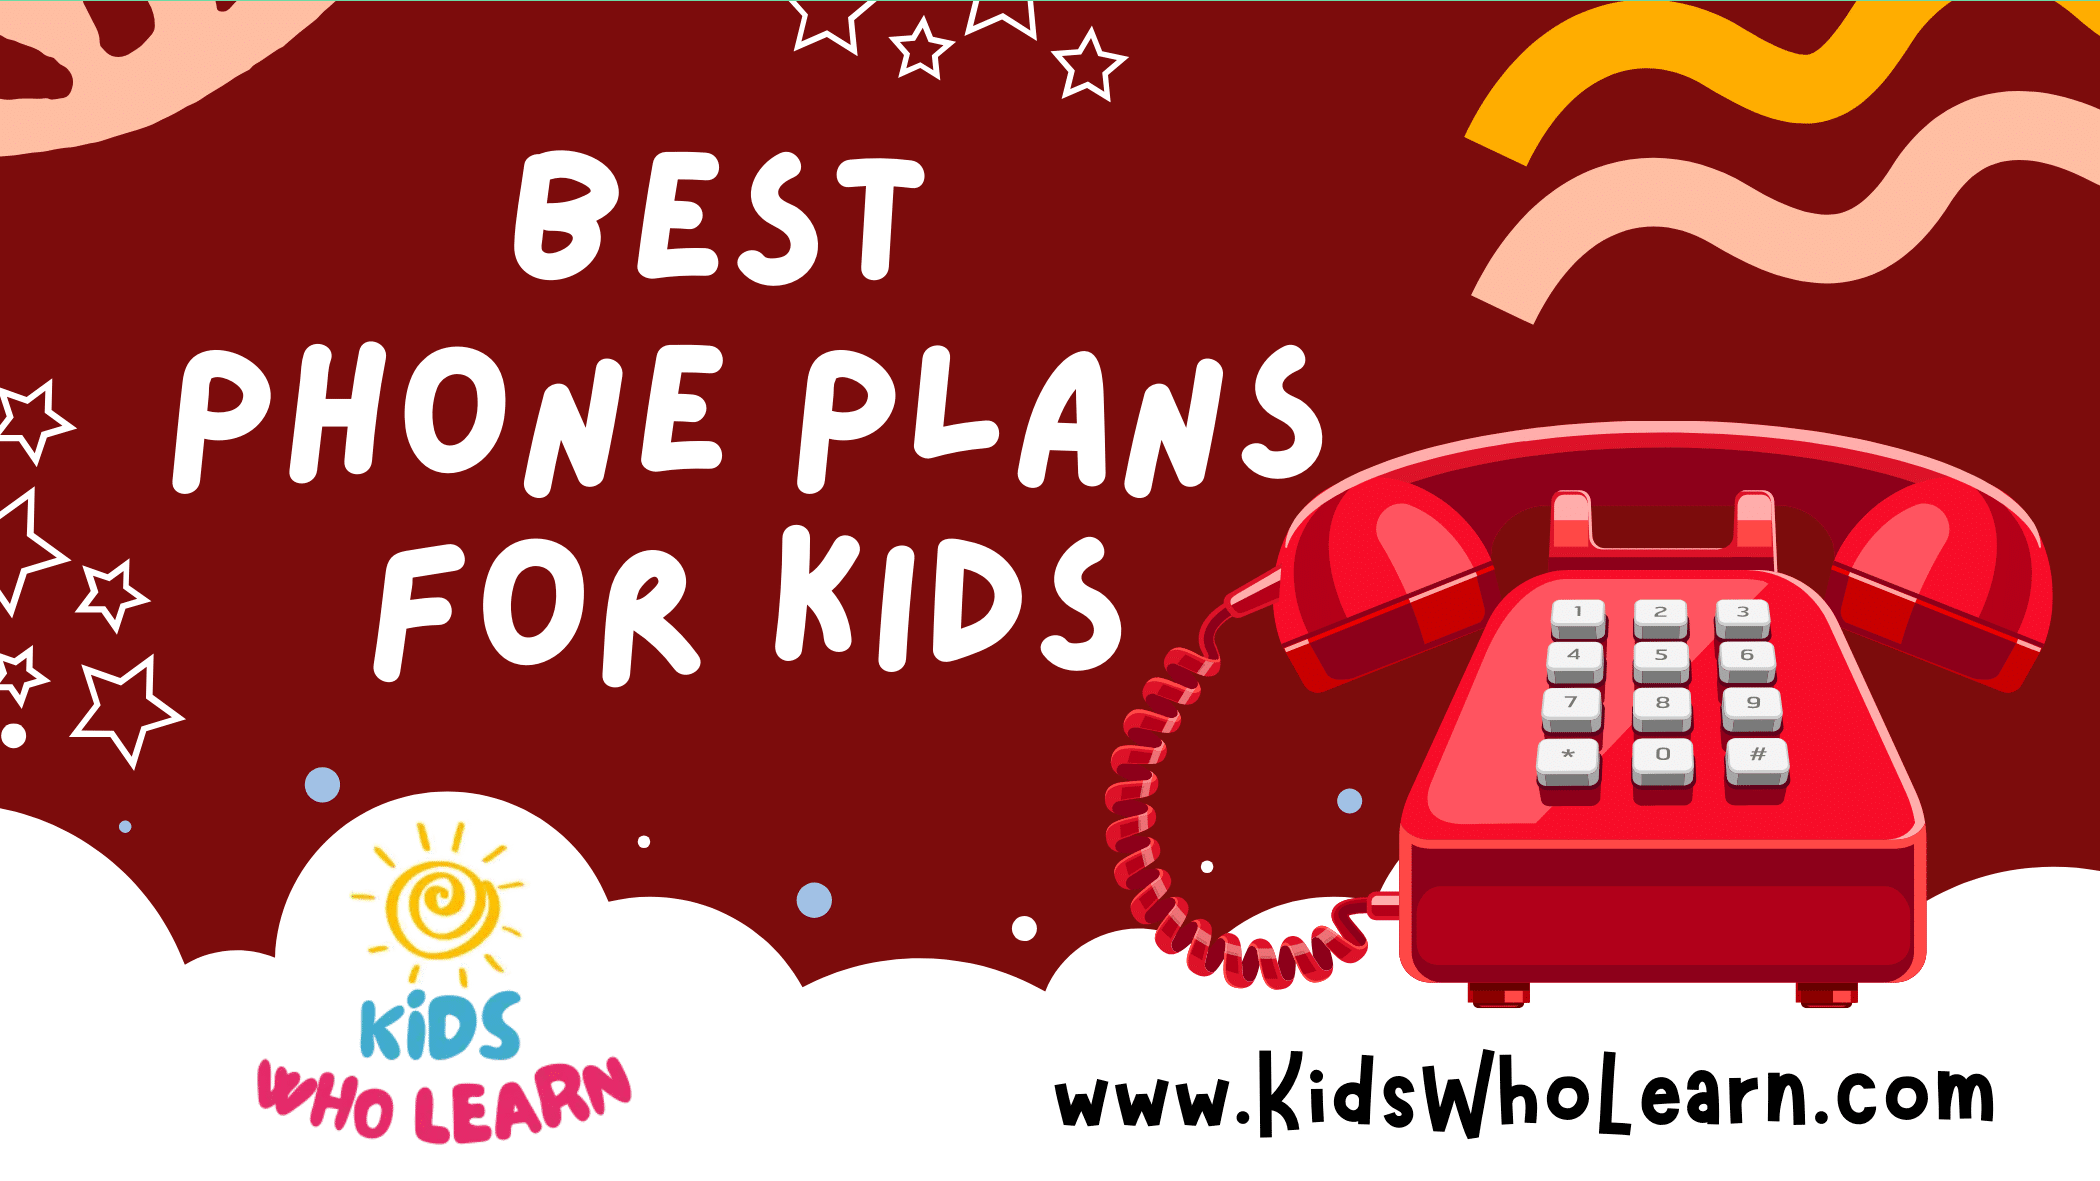 The Best Phone Plans for Kids: Affordable Options